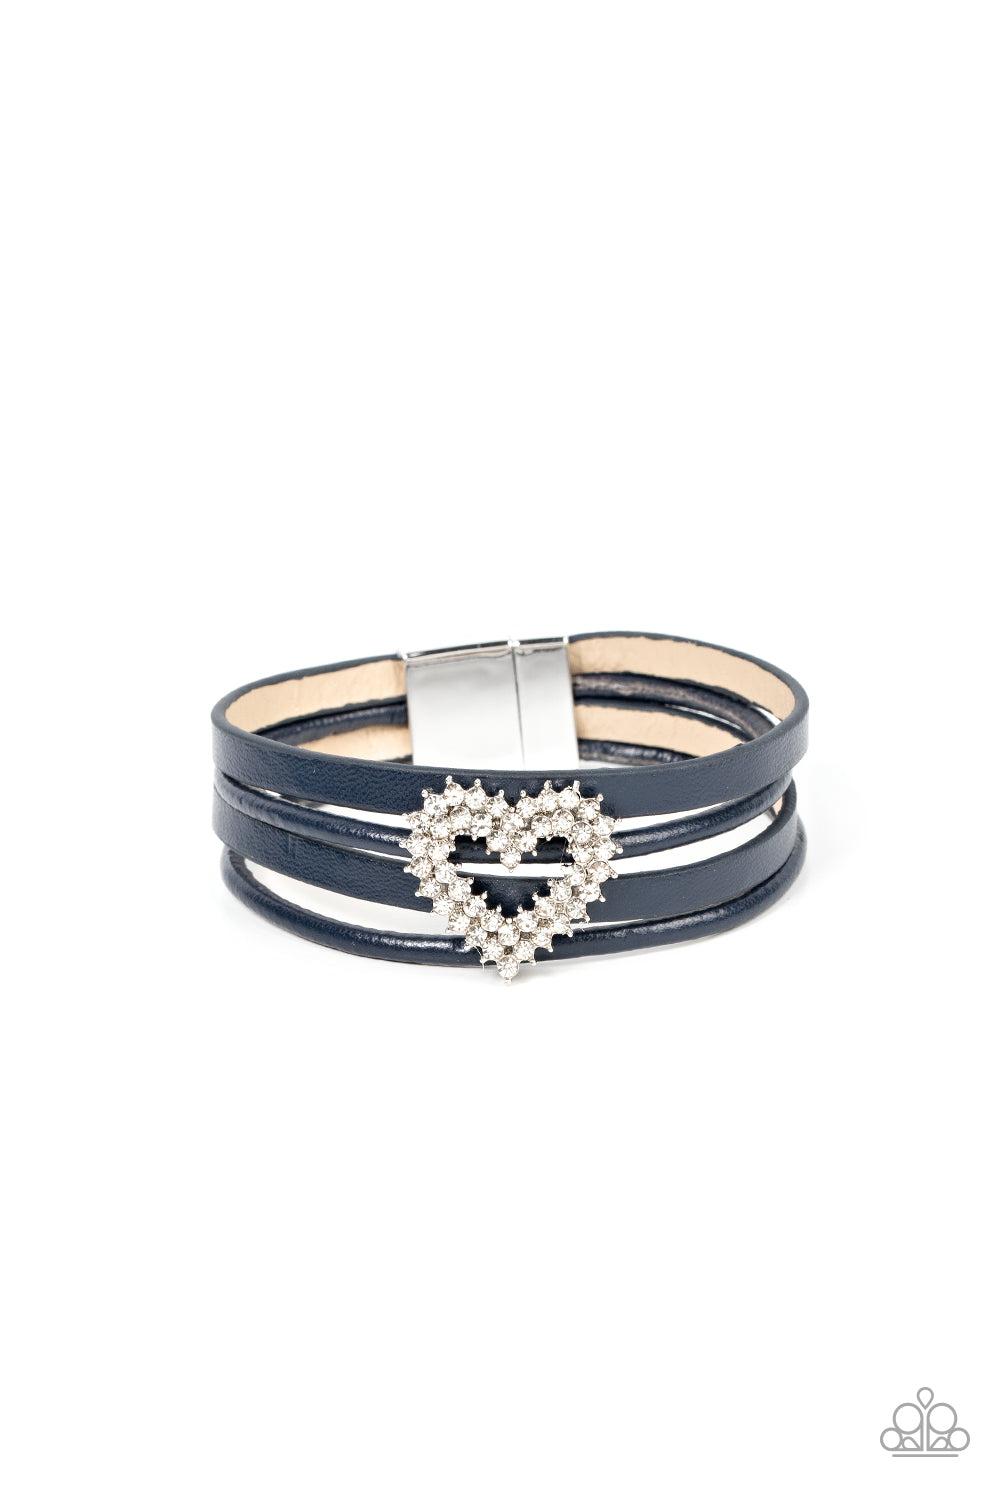 Wildly in Love Blue Rhinestone Heart Leather Bracelet - Paparazzi Accessories- lightbox - CarasShop.com - $5 Jewelry by Cara Jewels